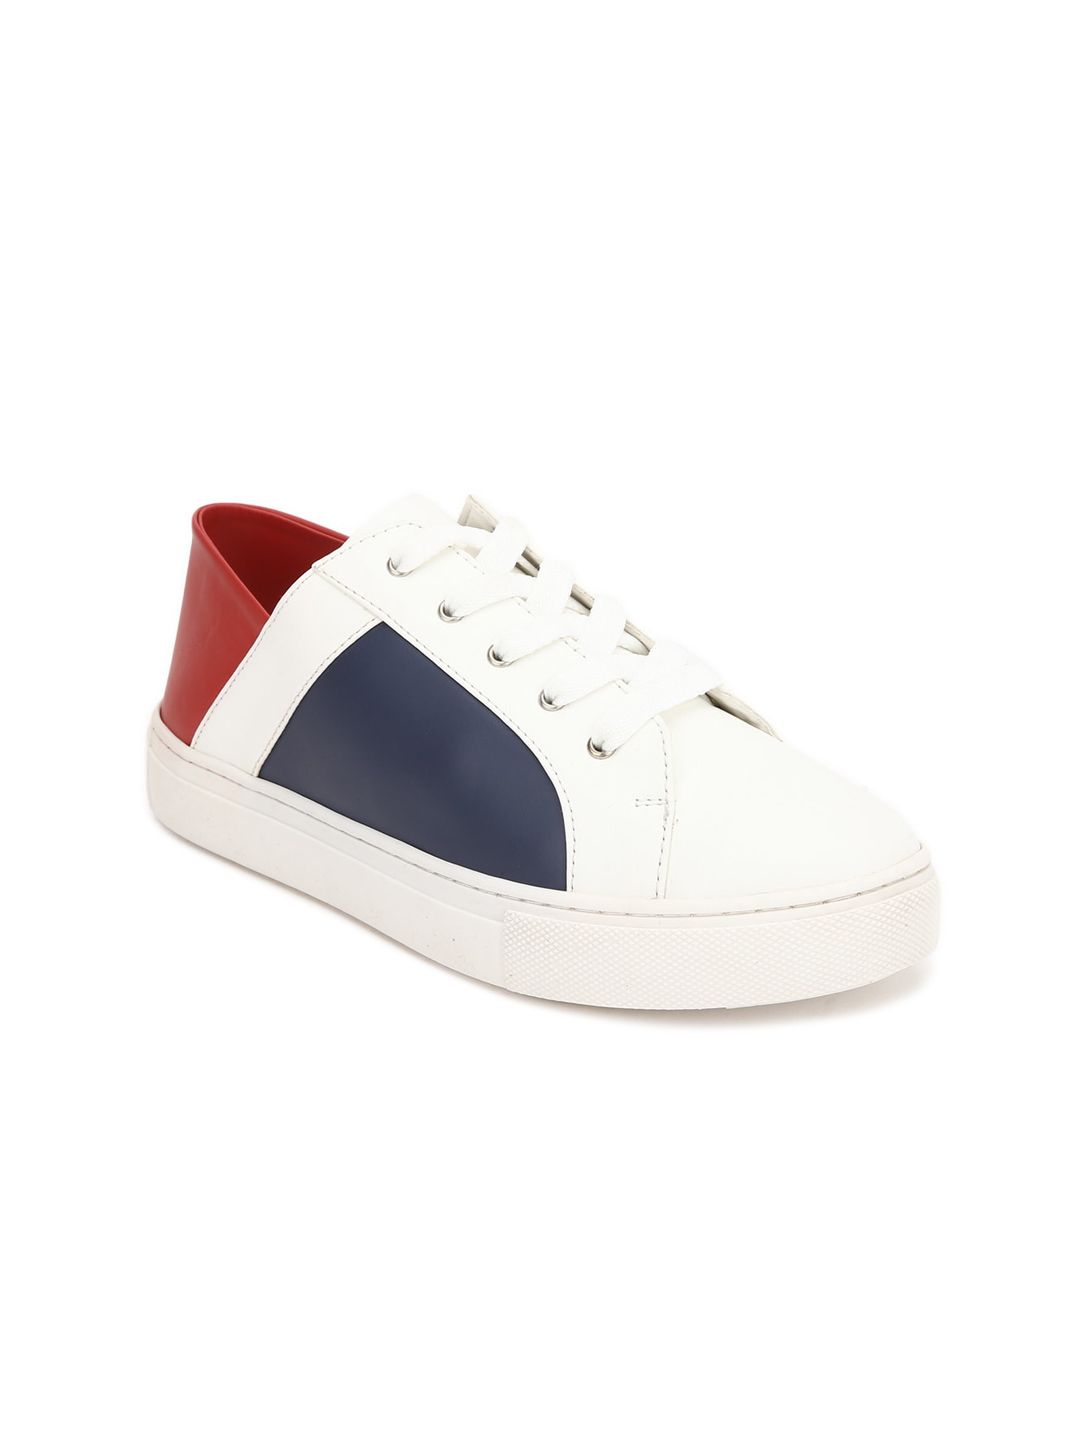 FOREVER 21 Women White Colourblocked PU Sneakers Price in India